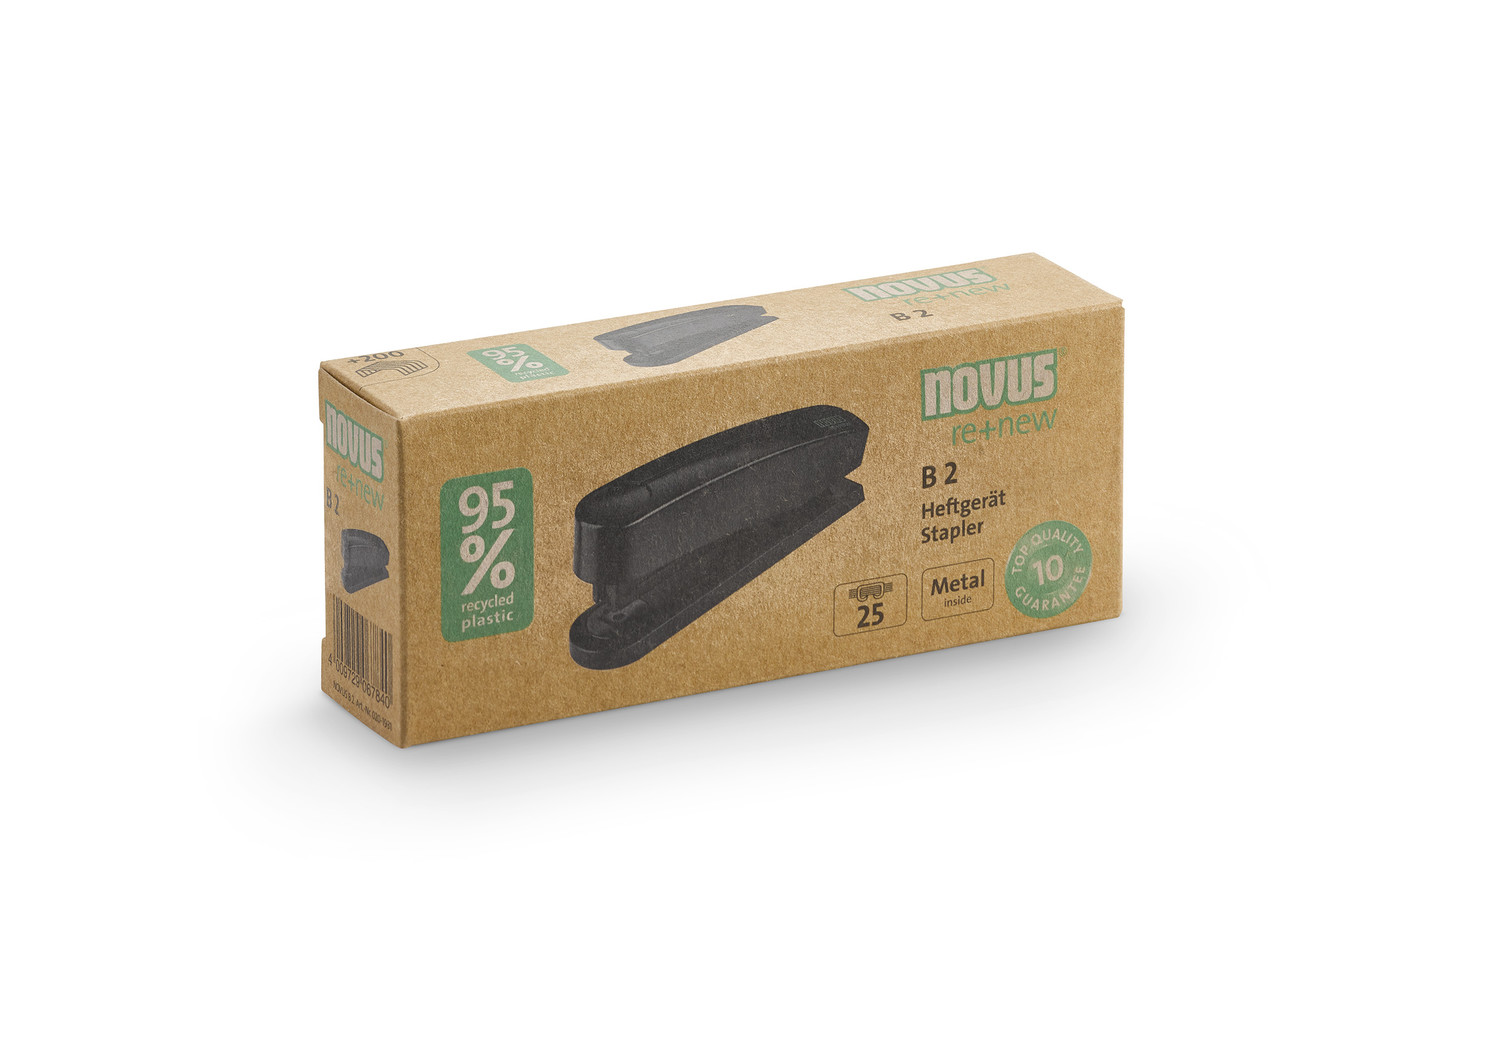 Environmentally friendly packaging without plastic: NOVUS B 2 re+new